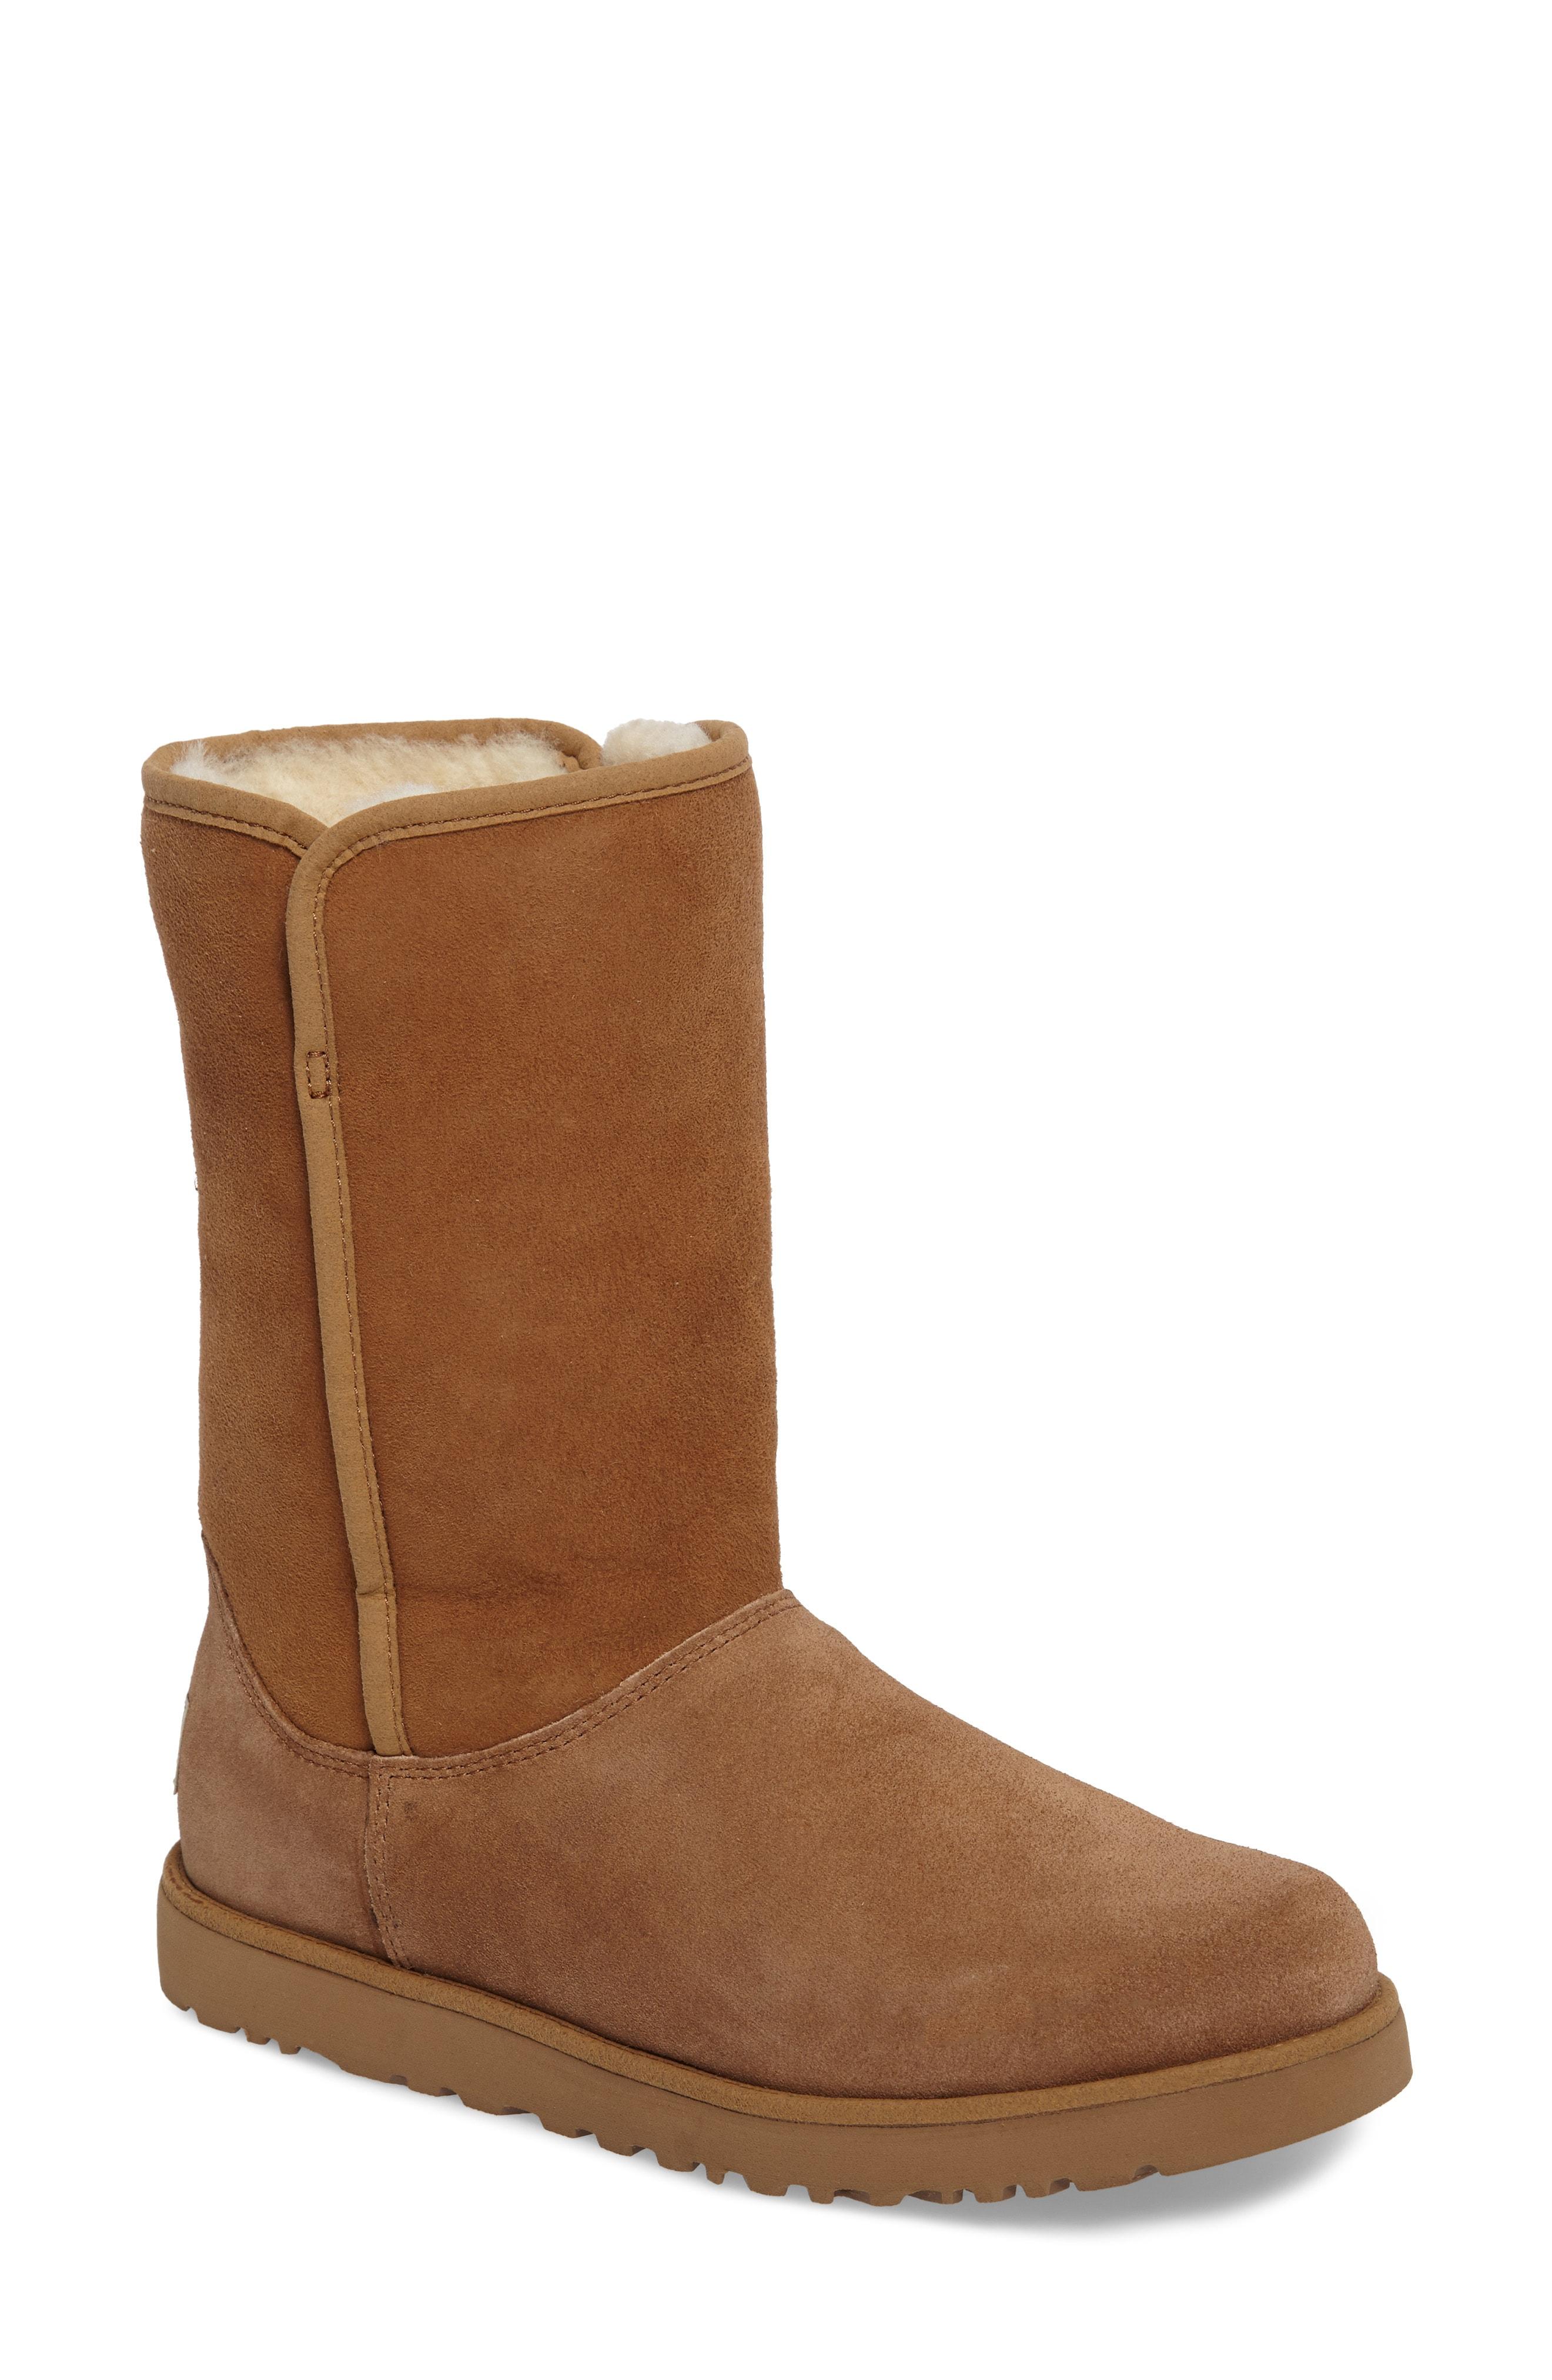 ugg michelle boots